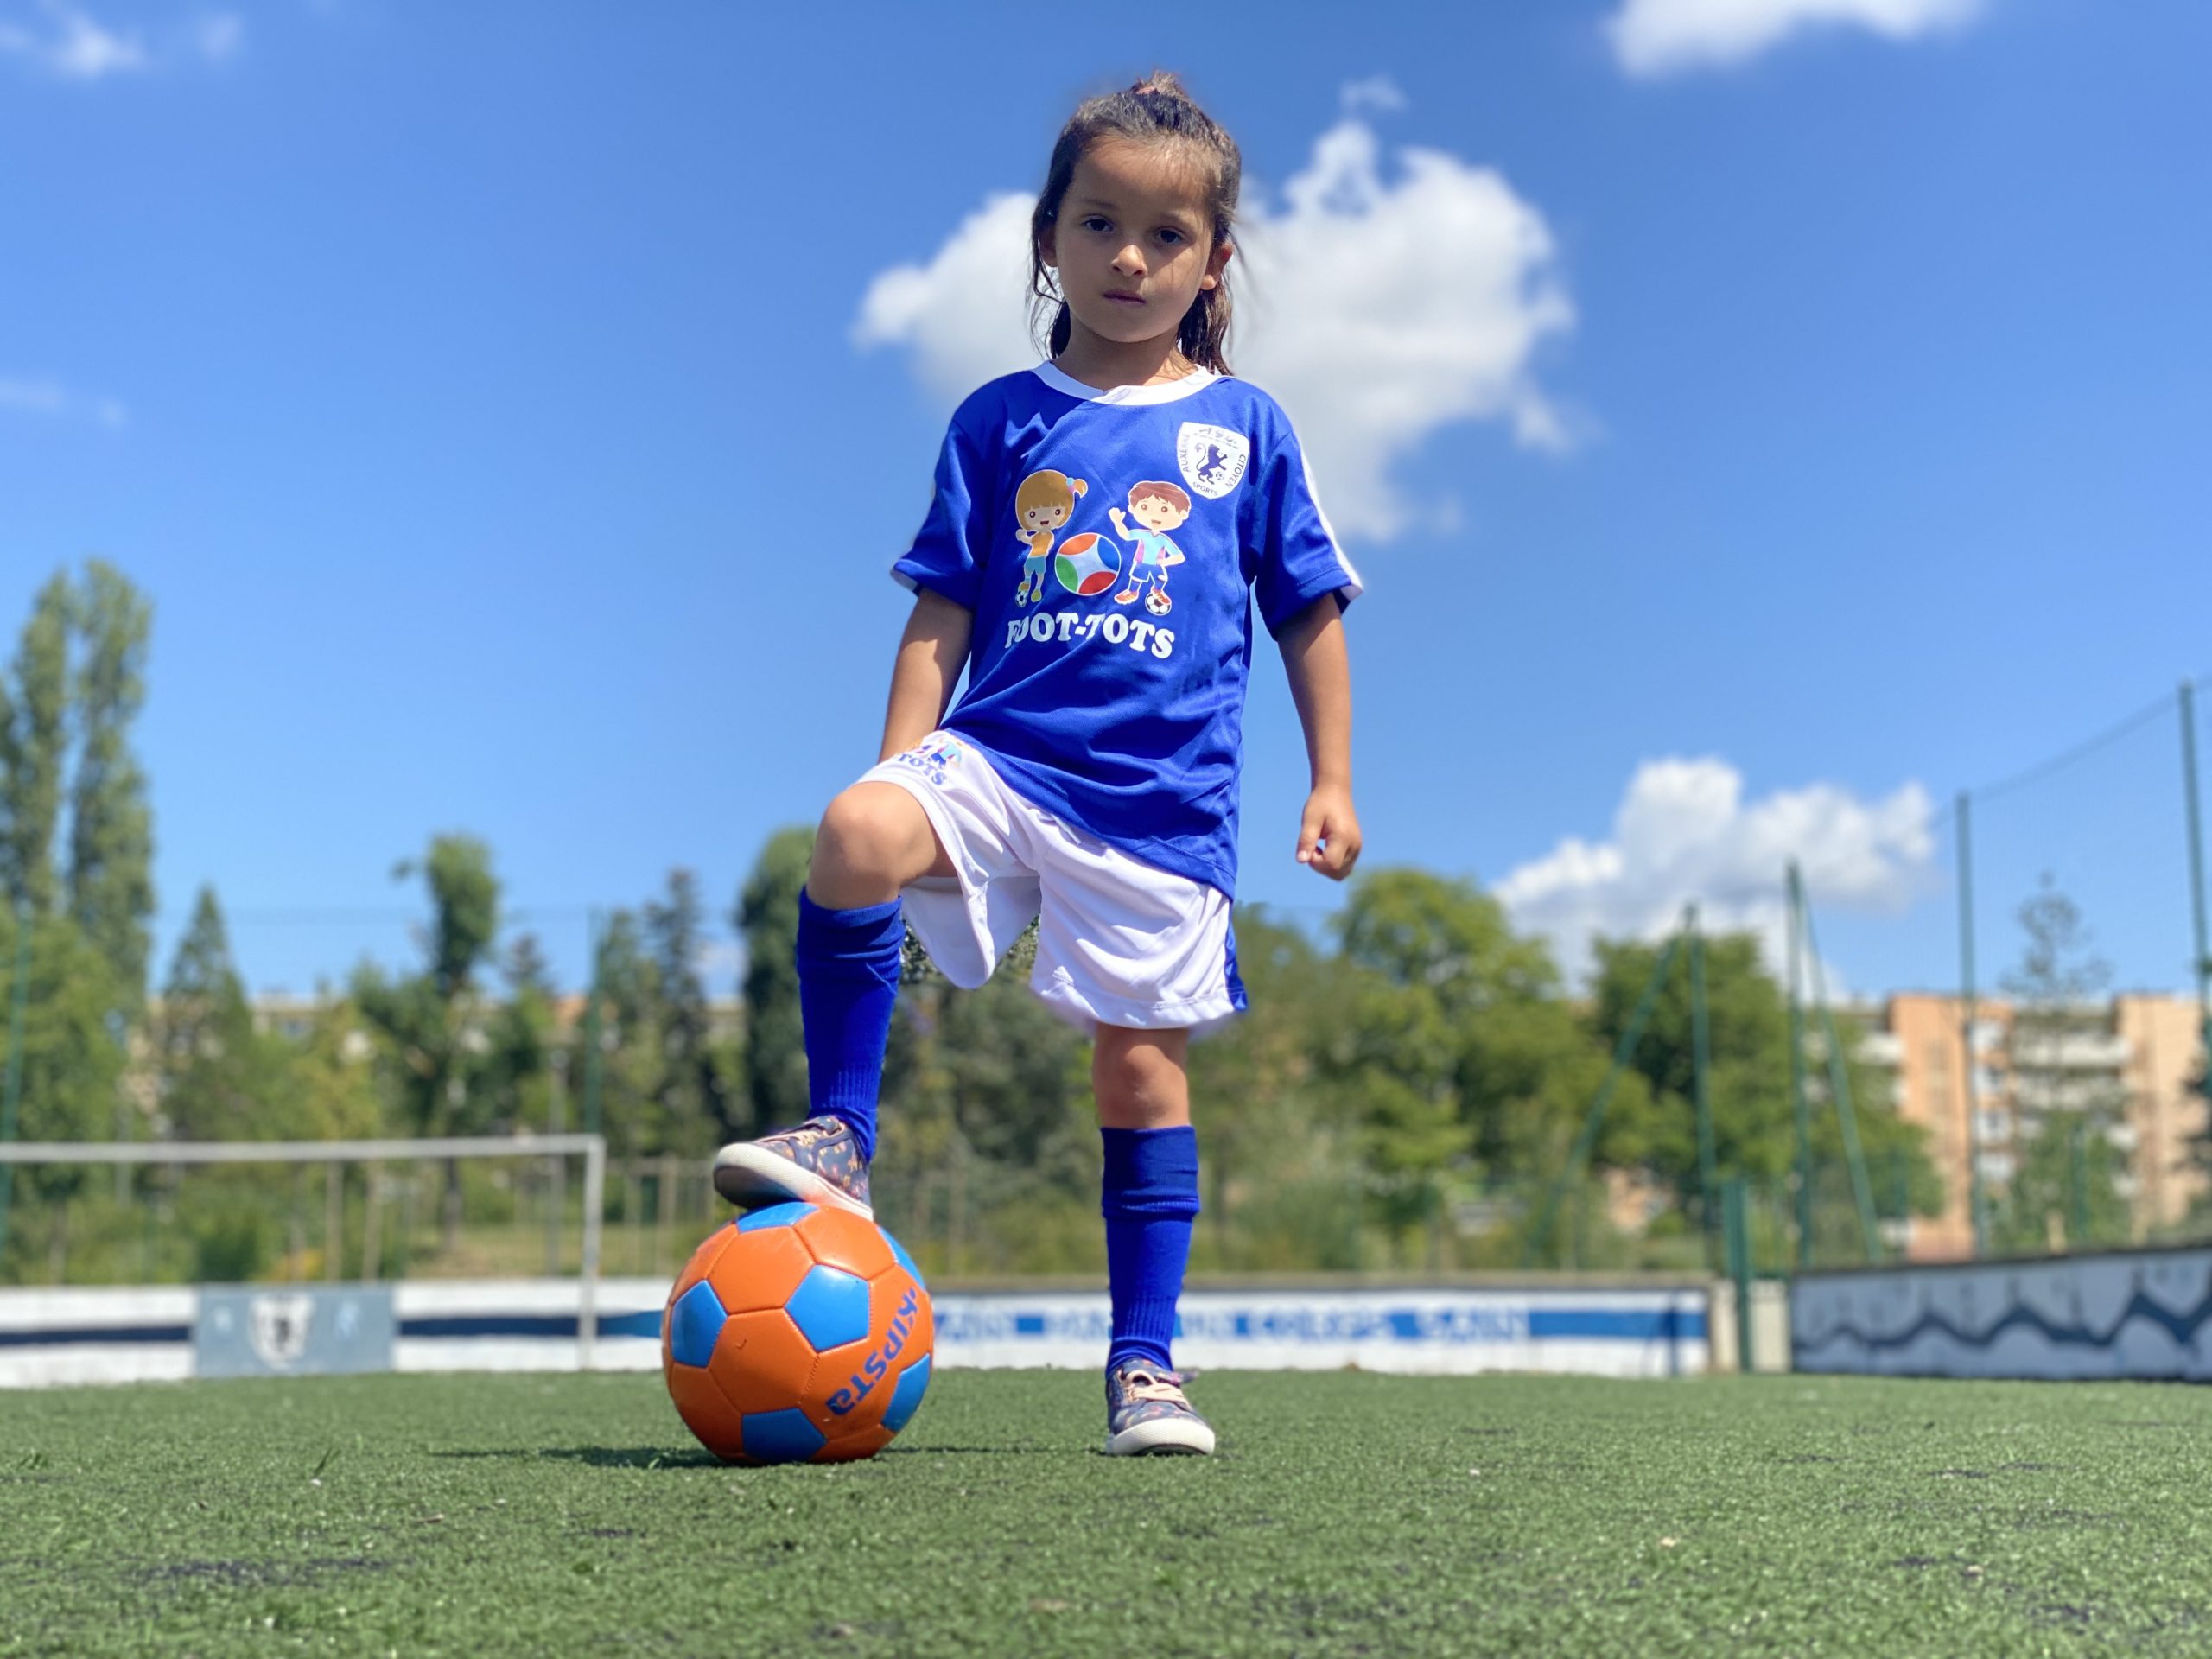 https://foot-tots.com/wp-content/uploads/2020/07/IMG_4135-2-scaled.jpg